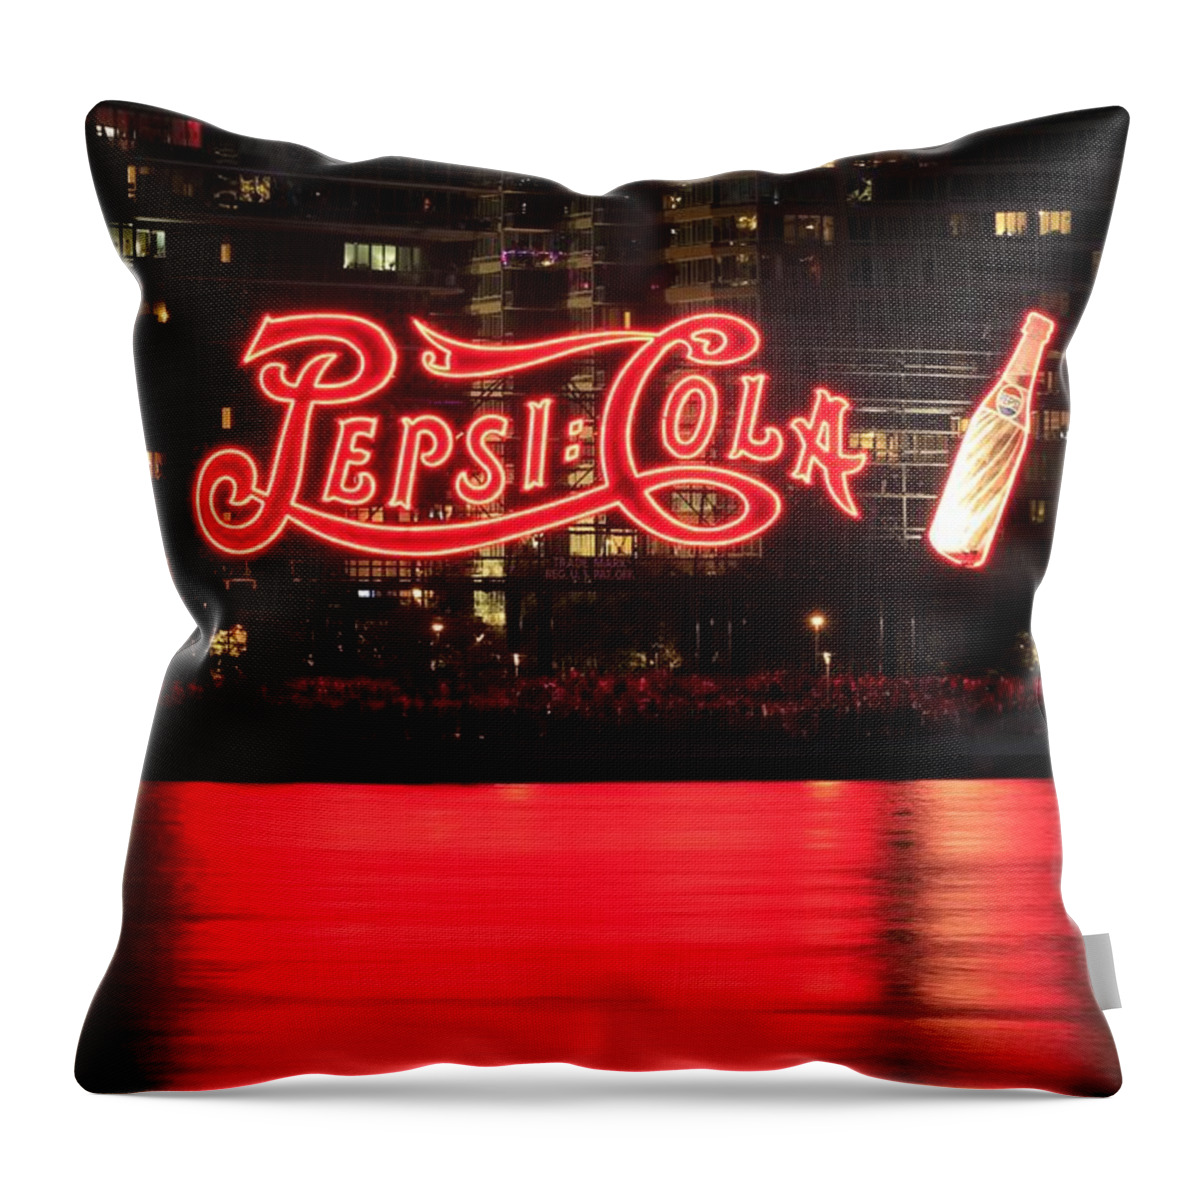  East River Throw Pillow featuring the photograph Pepsi Time by Catie Canetti